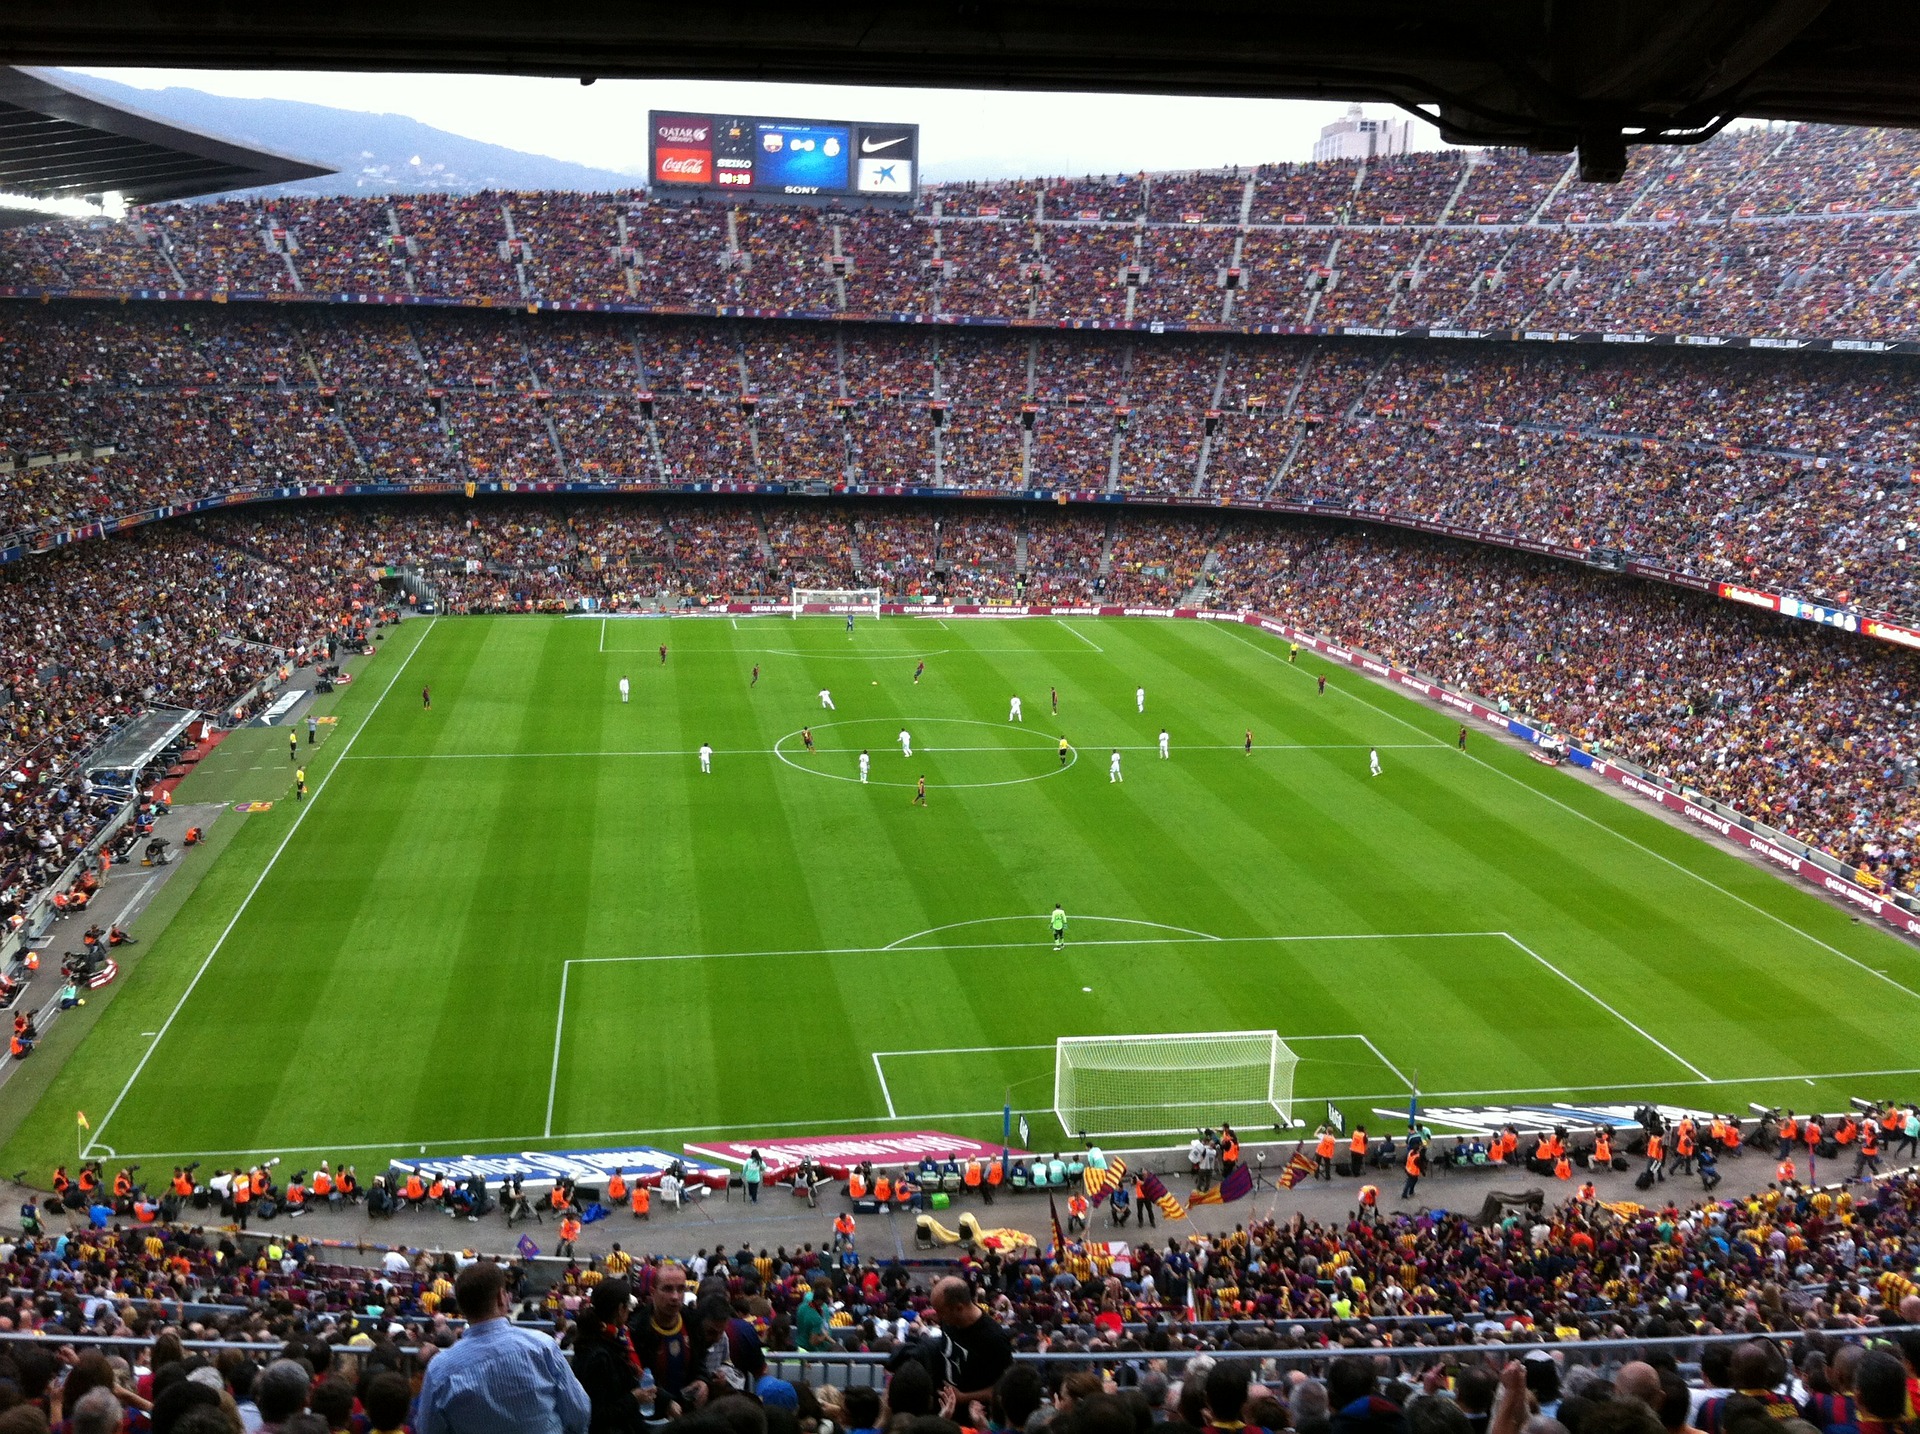 Camp Nou, where the club FC Barcelona (or Barça) plays, can seat almost 100,000 people. And when it’s packed, that’s over two hours of intense time with your friends, family, and fellow supporters.